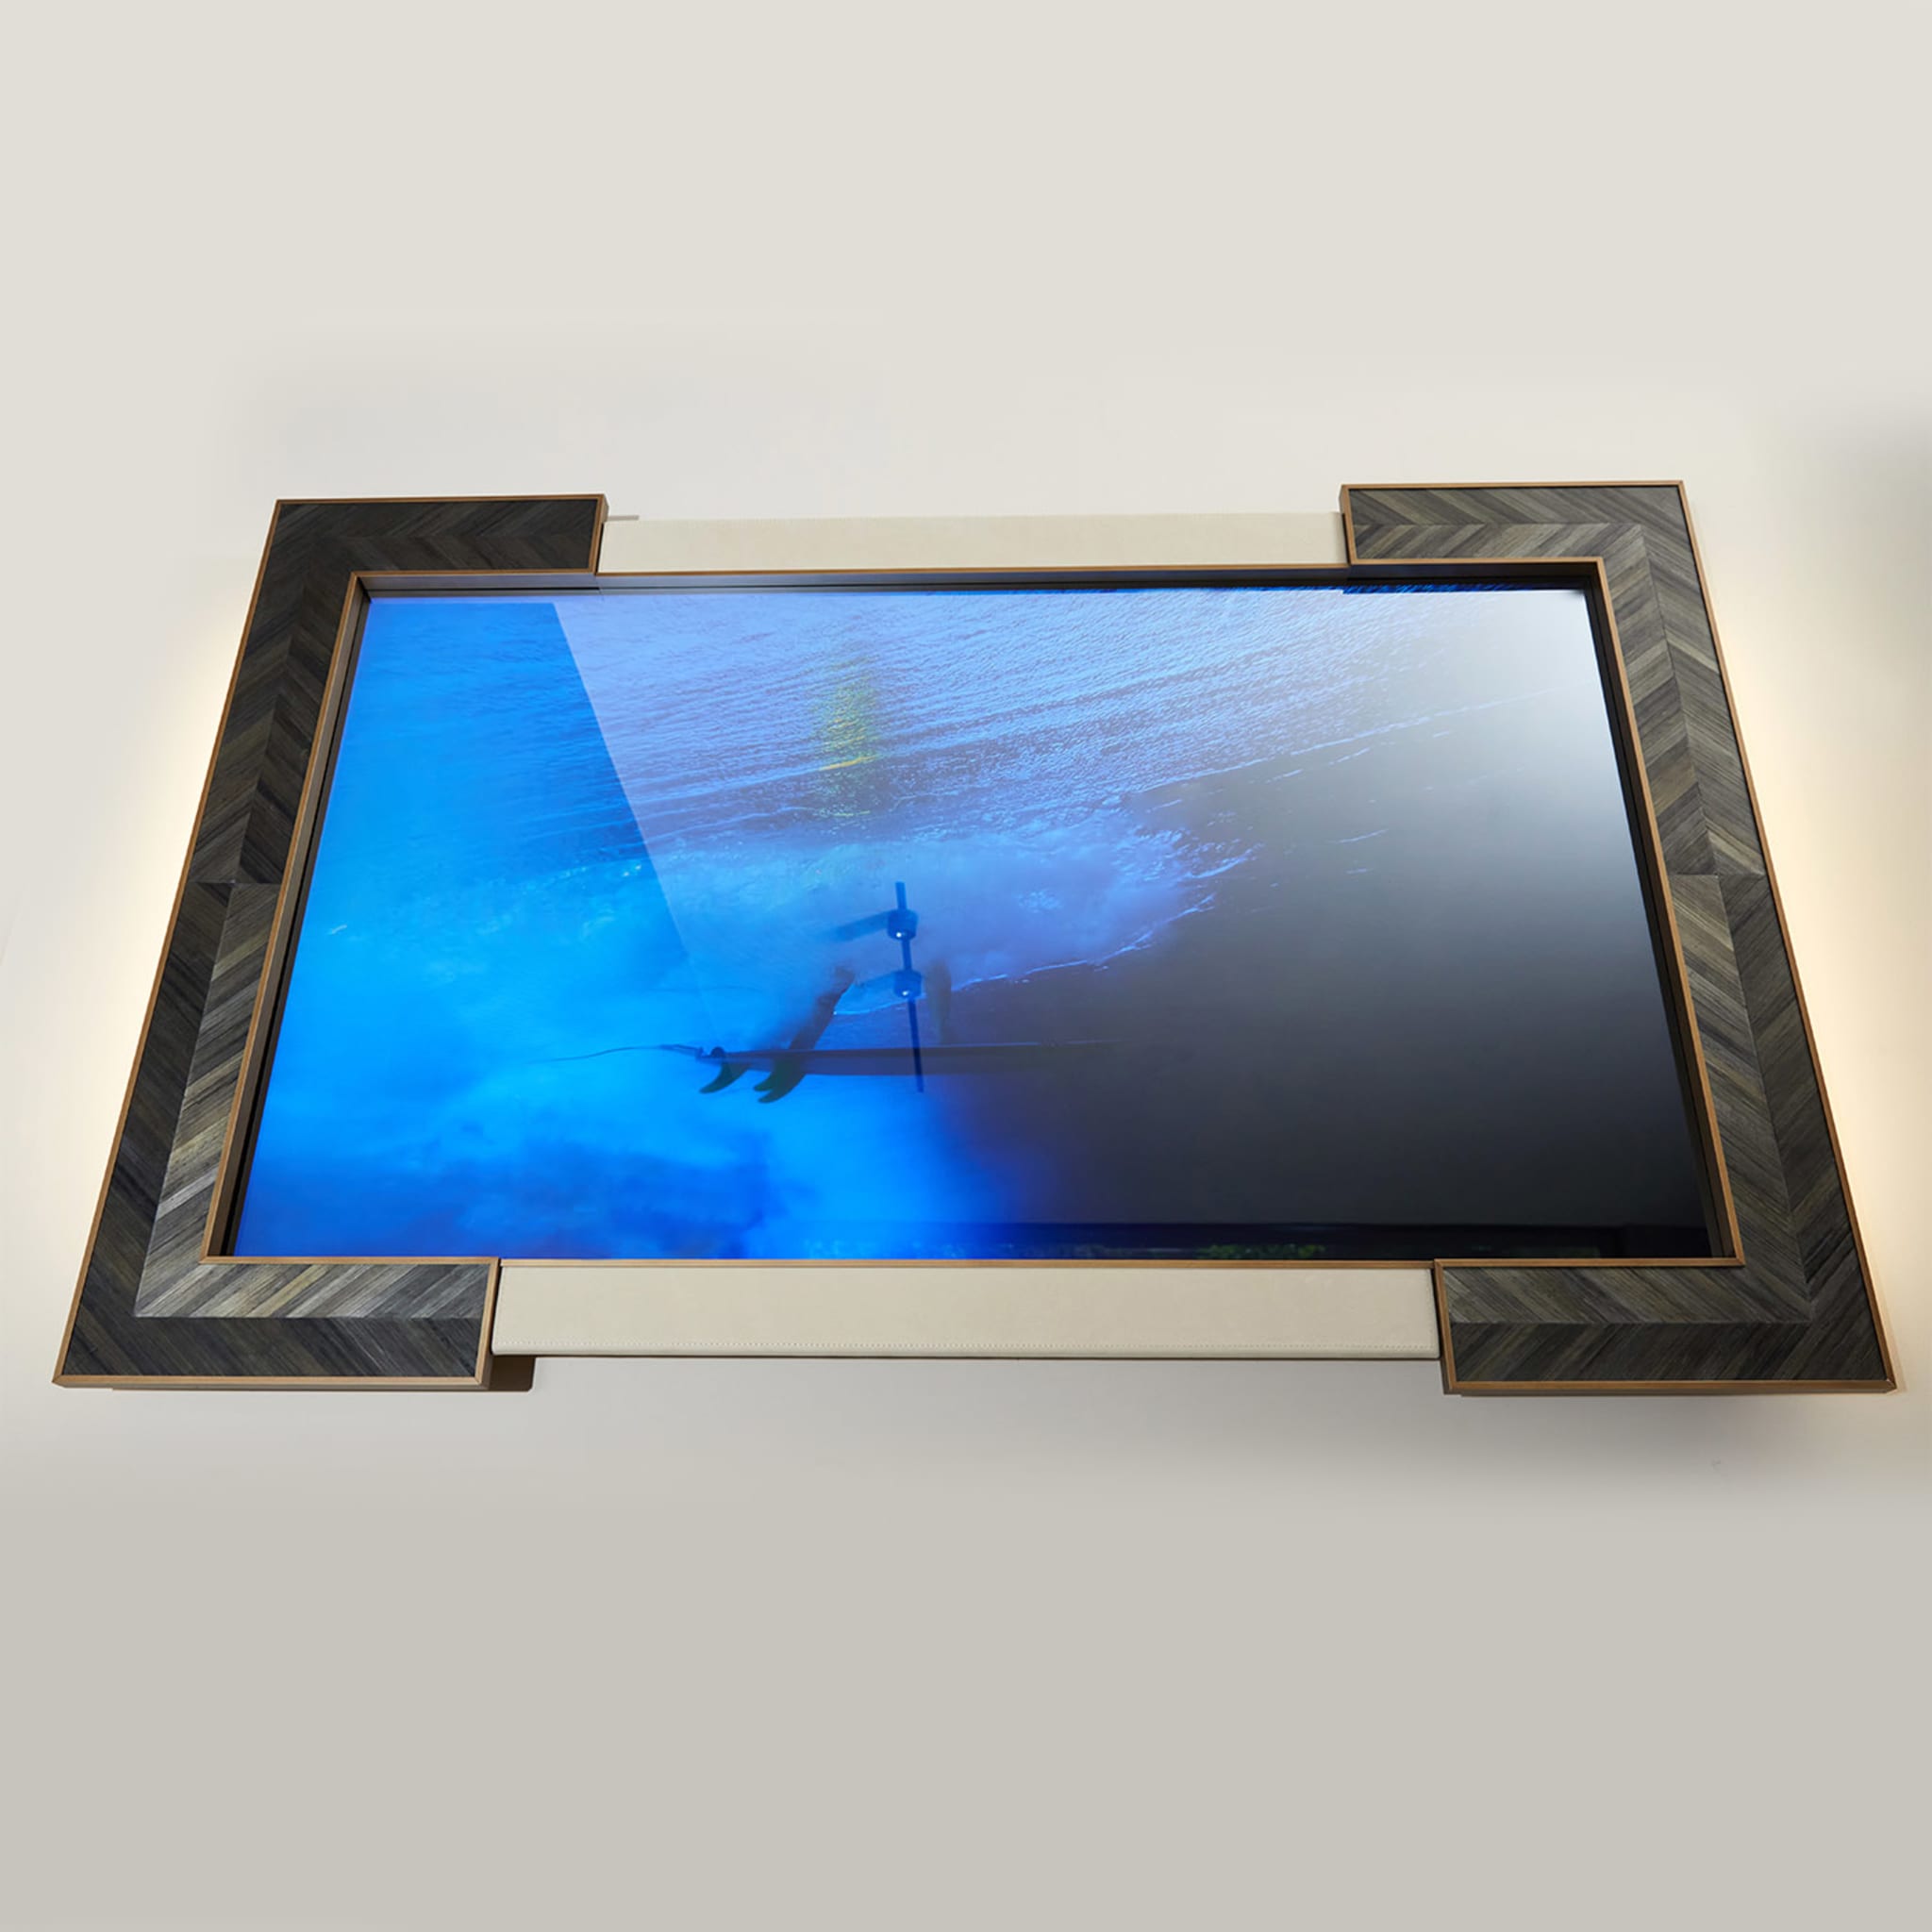 Grisaglia Wall Mirror with Integrated 43" TV by Alfredo Colombo - Alternative view 5